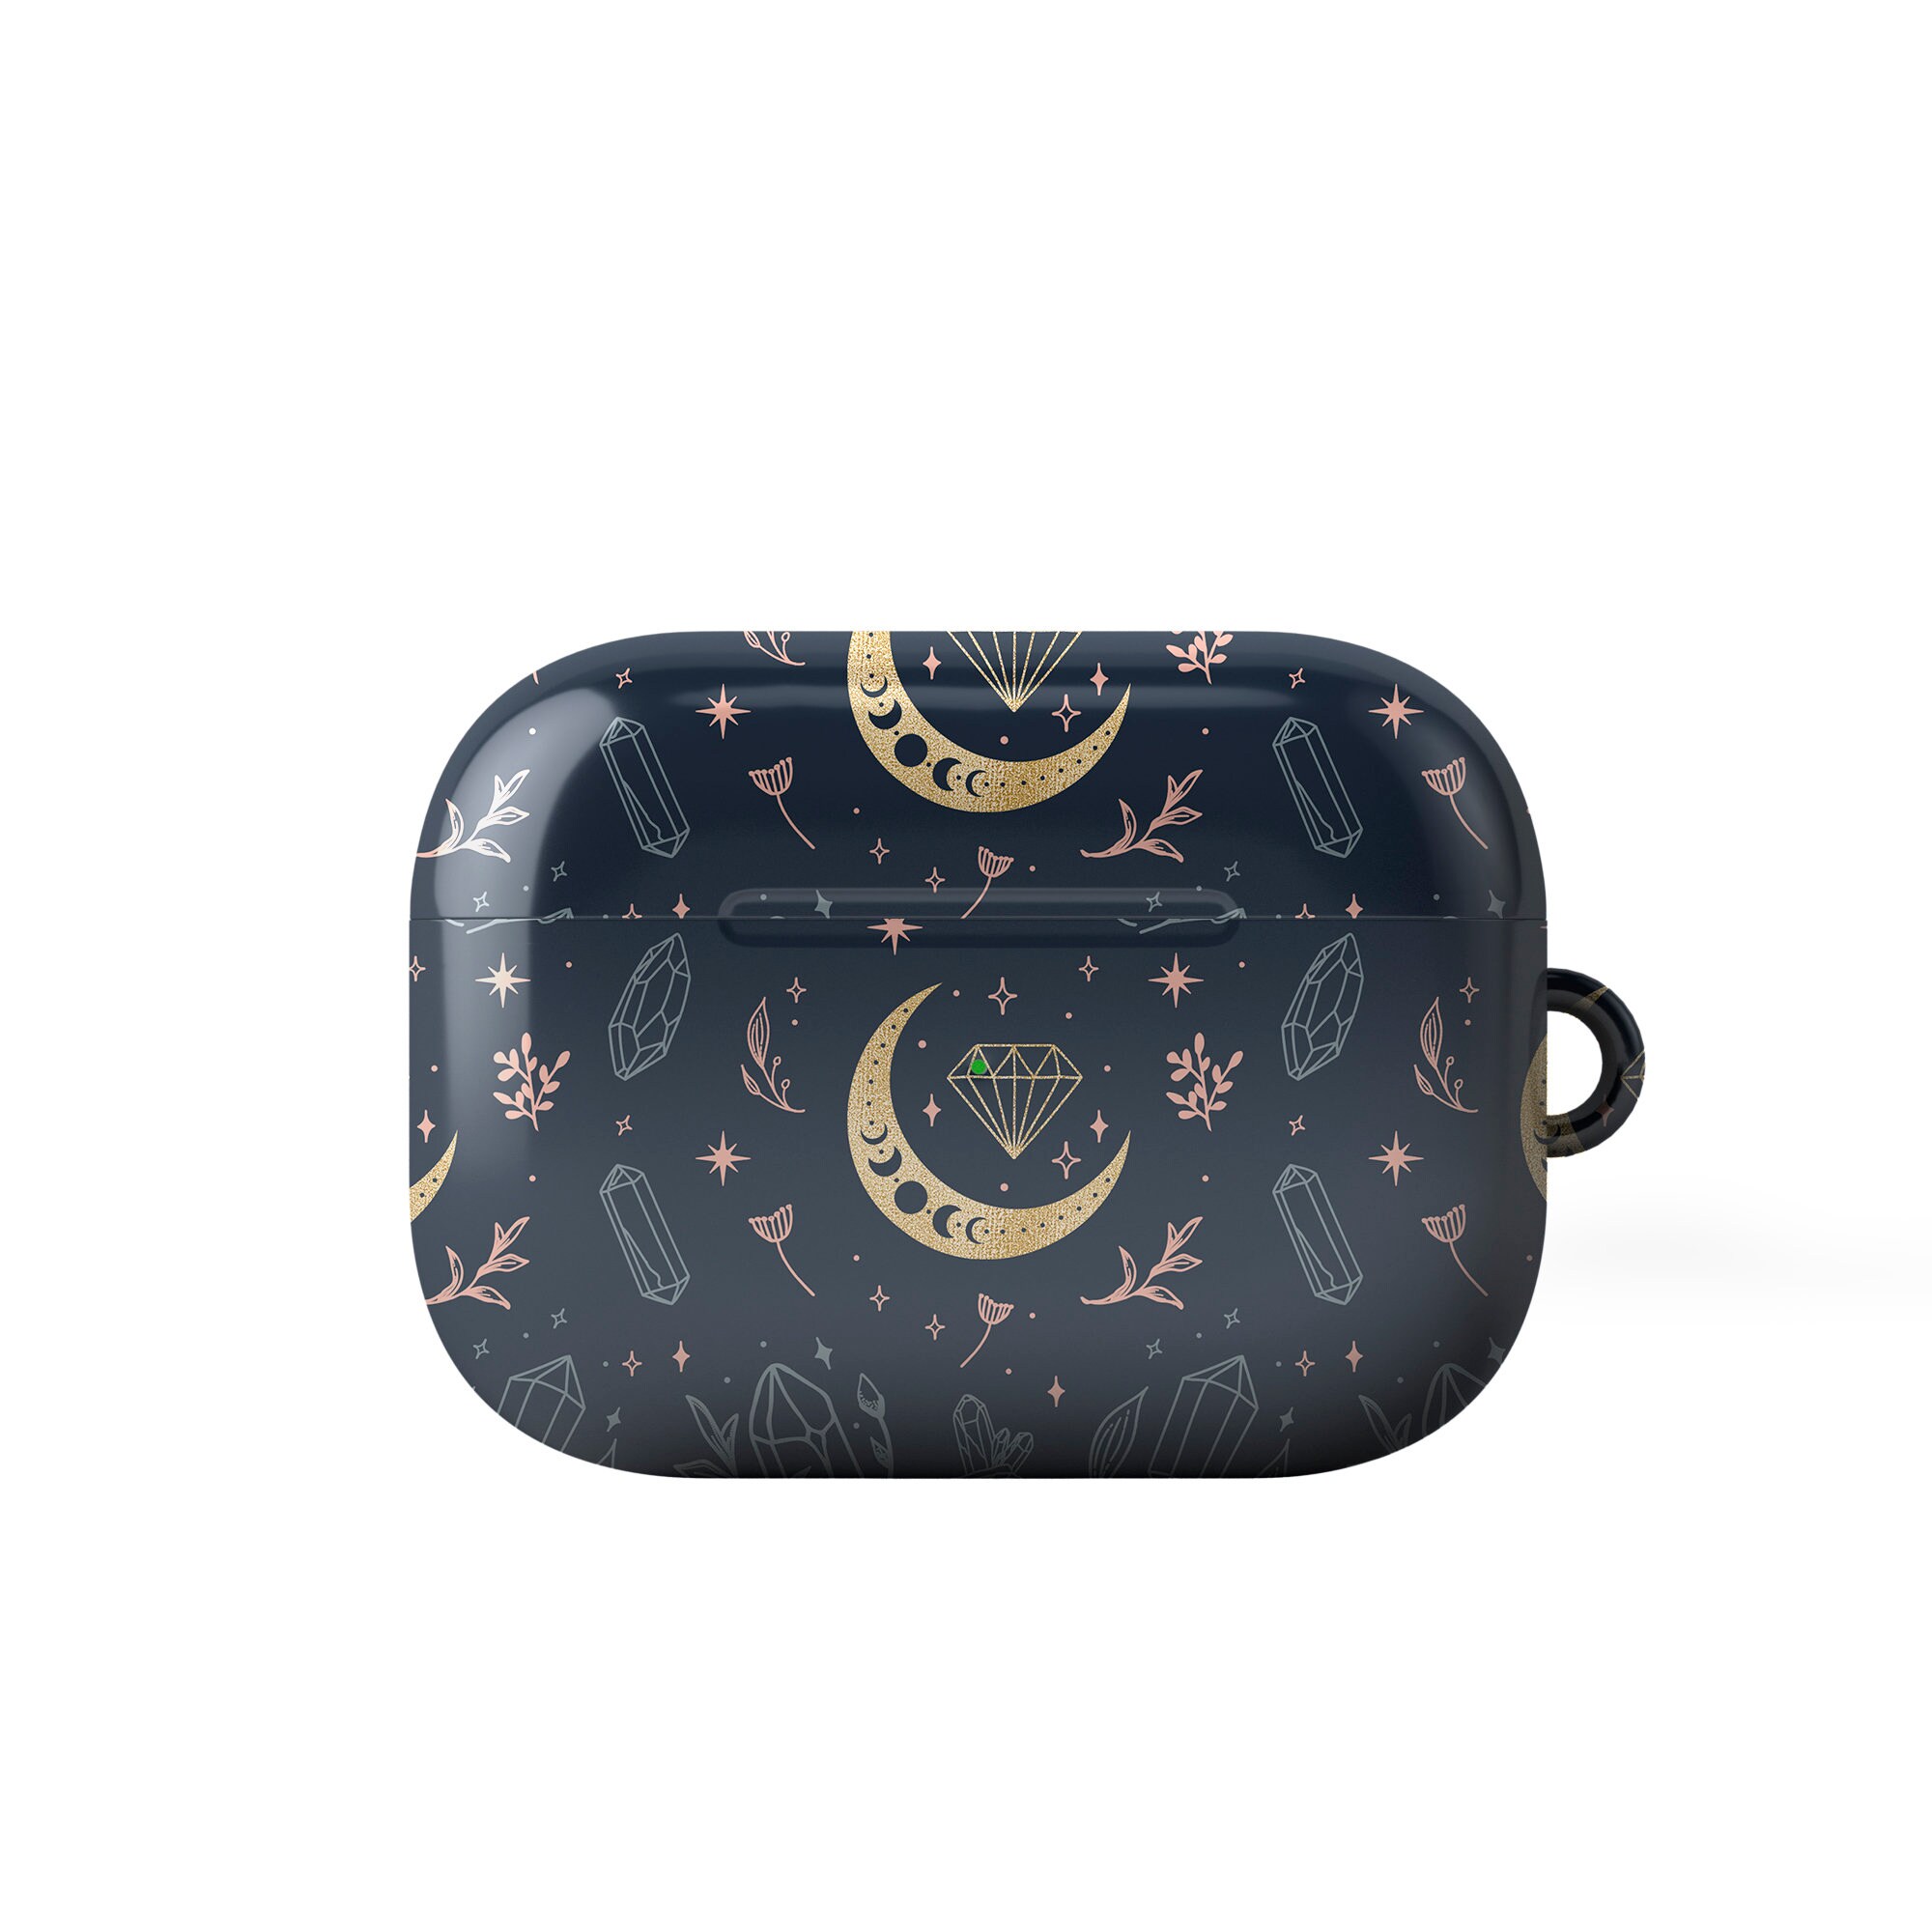 AirPods 3rd Generation Contemporary Cover, Sun Crescent and Stars